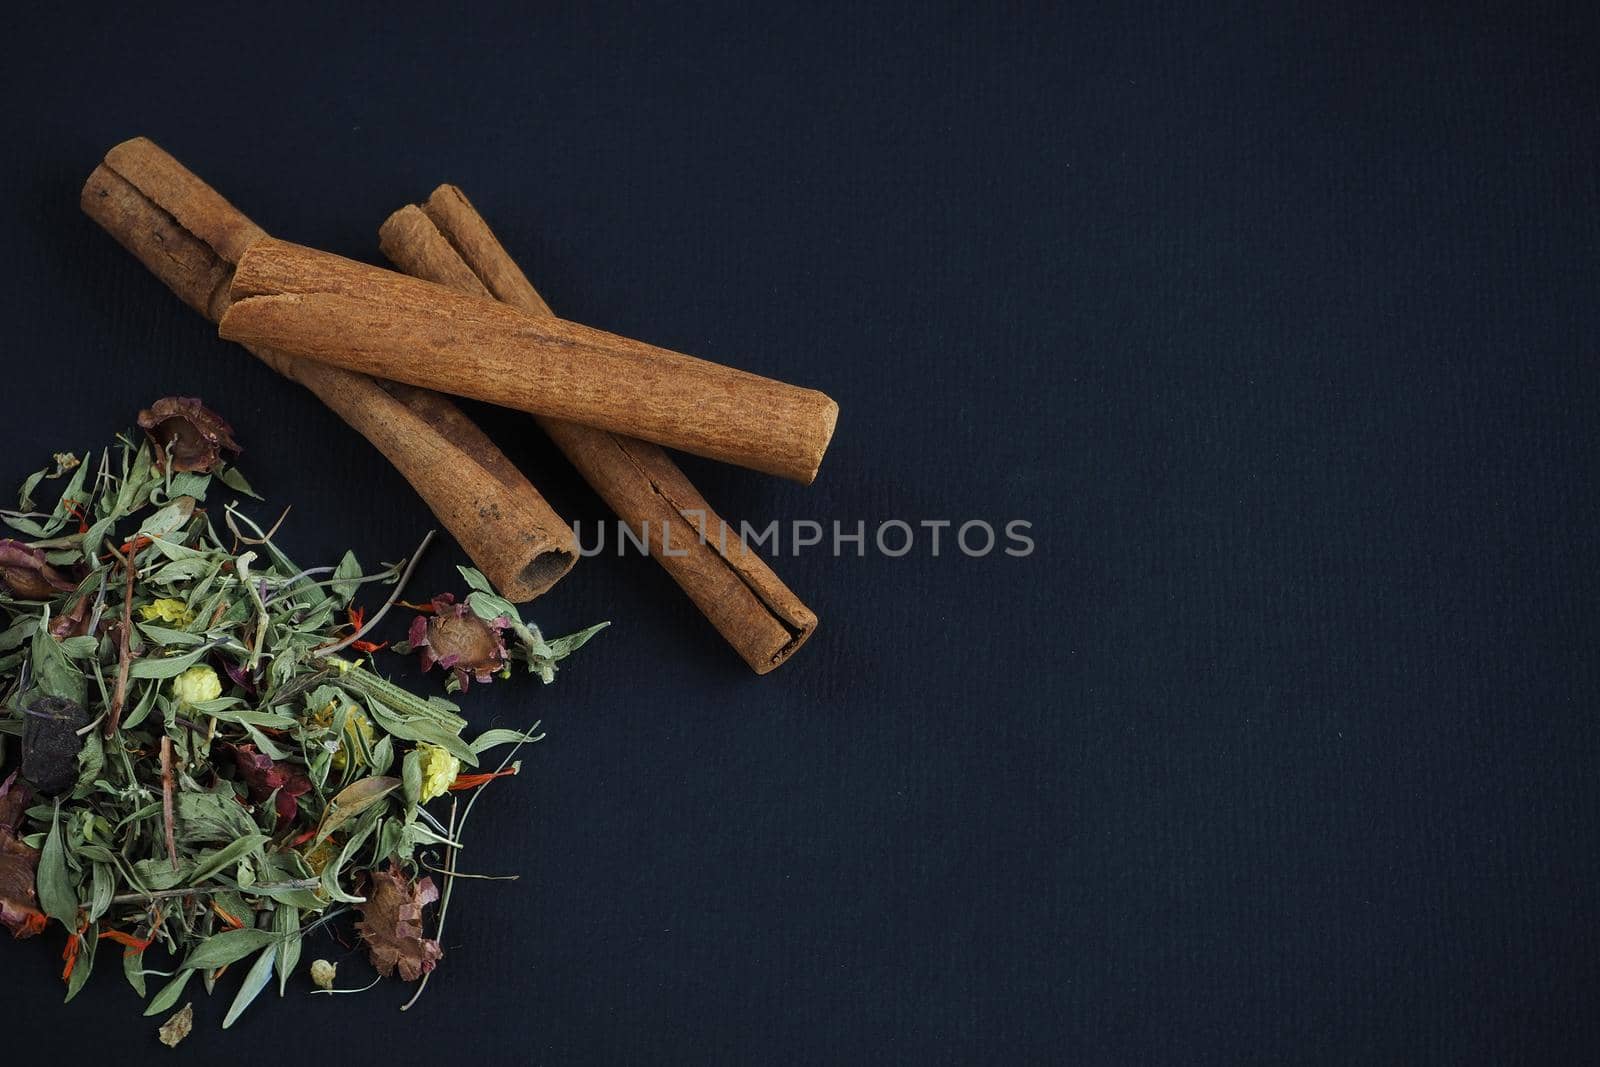 Dried cinnamon sticks and herbal tea on a black background. A quality image.